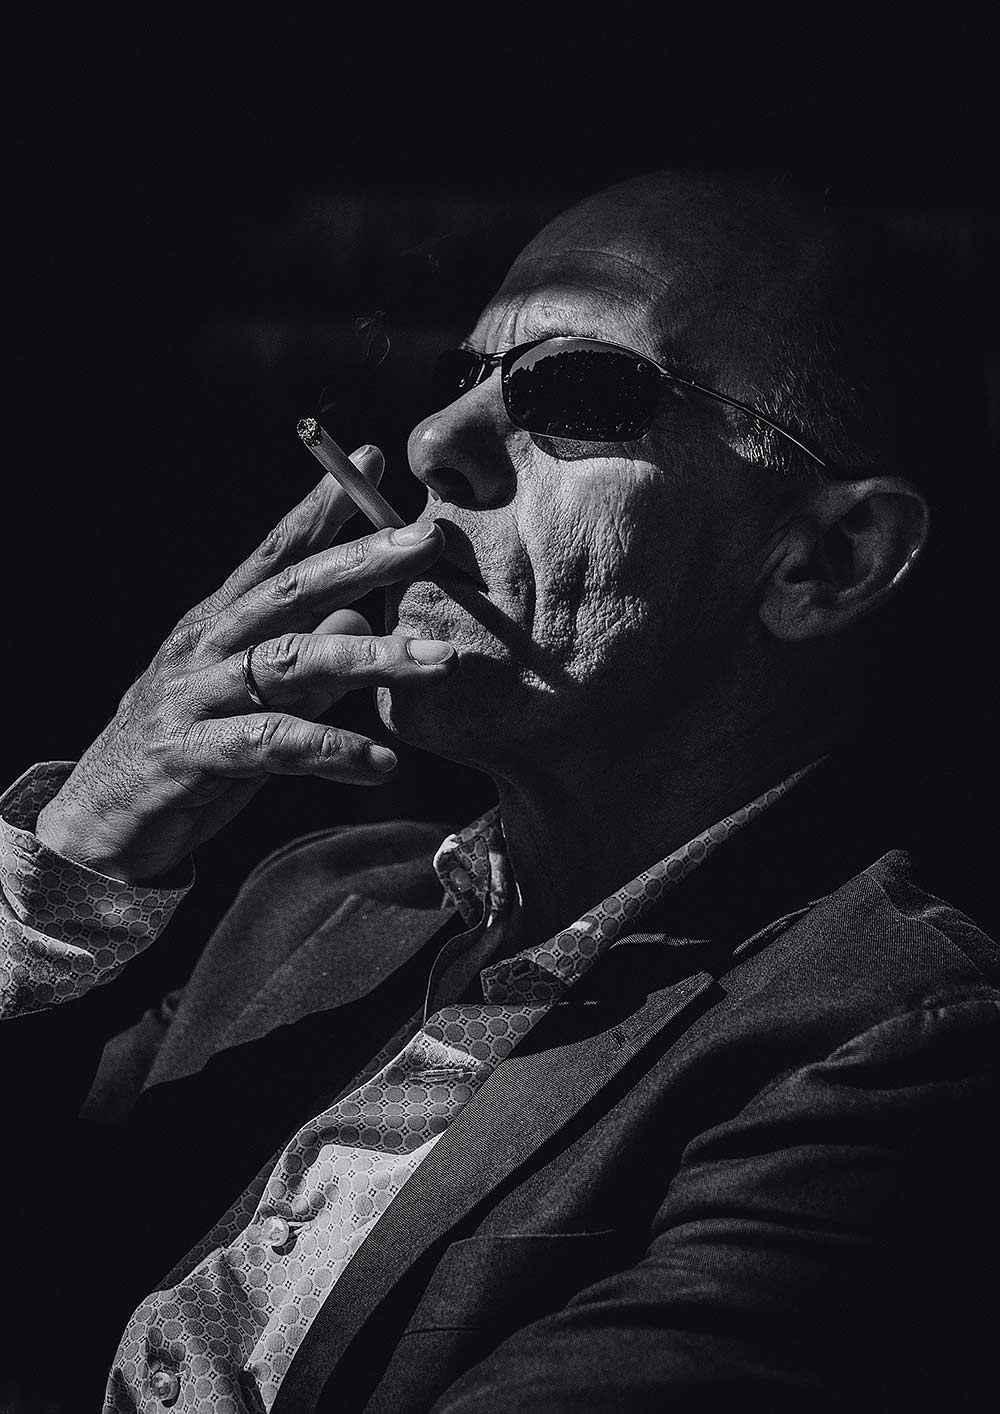 old man smoking a joint in grayscale